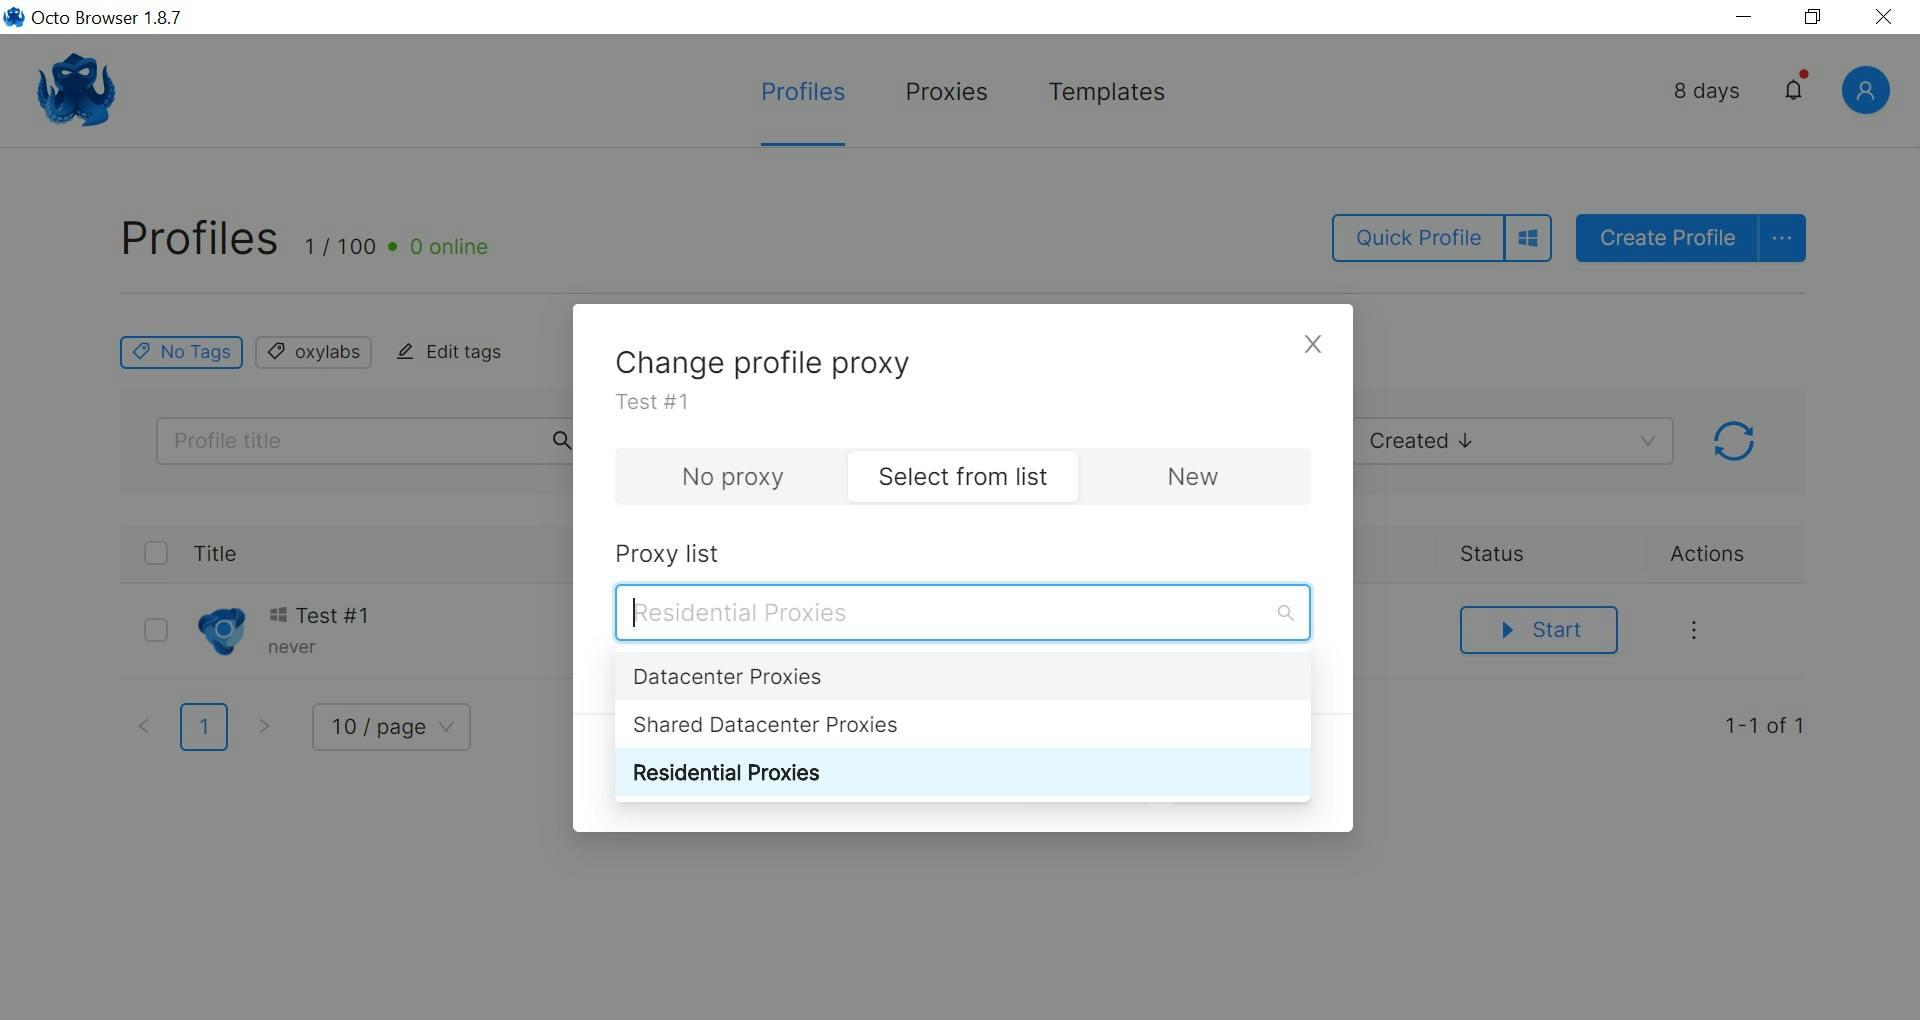 Pairing a profile with a proxy